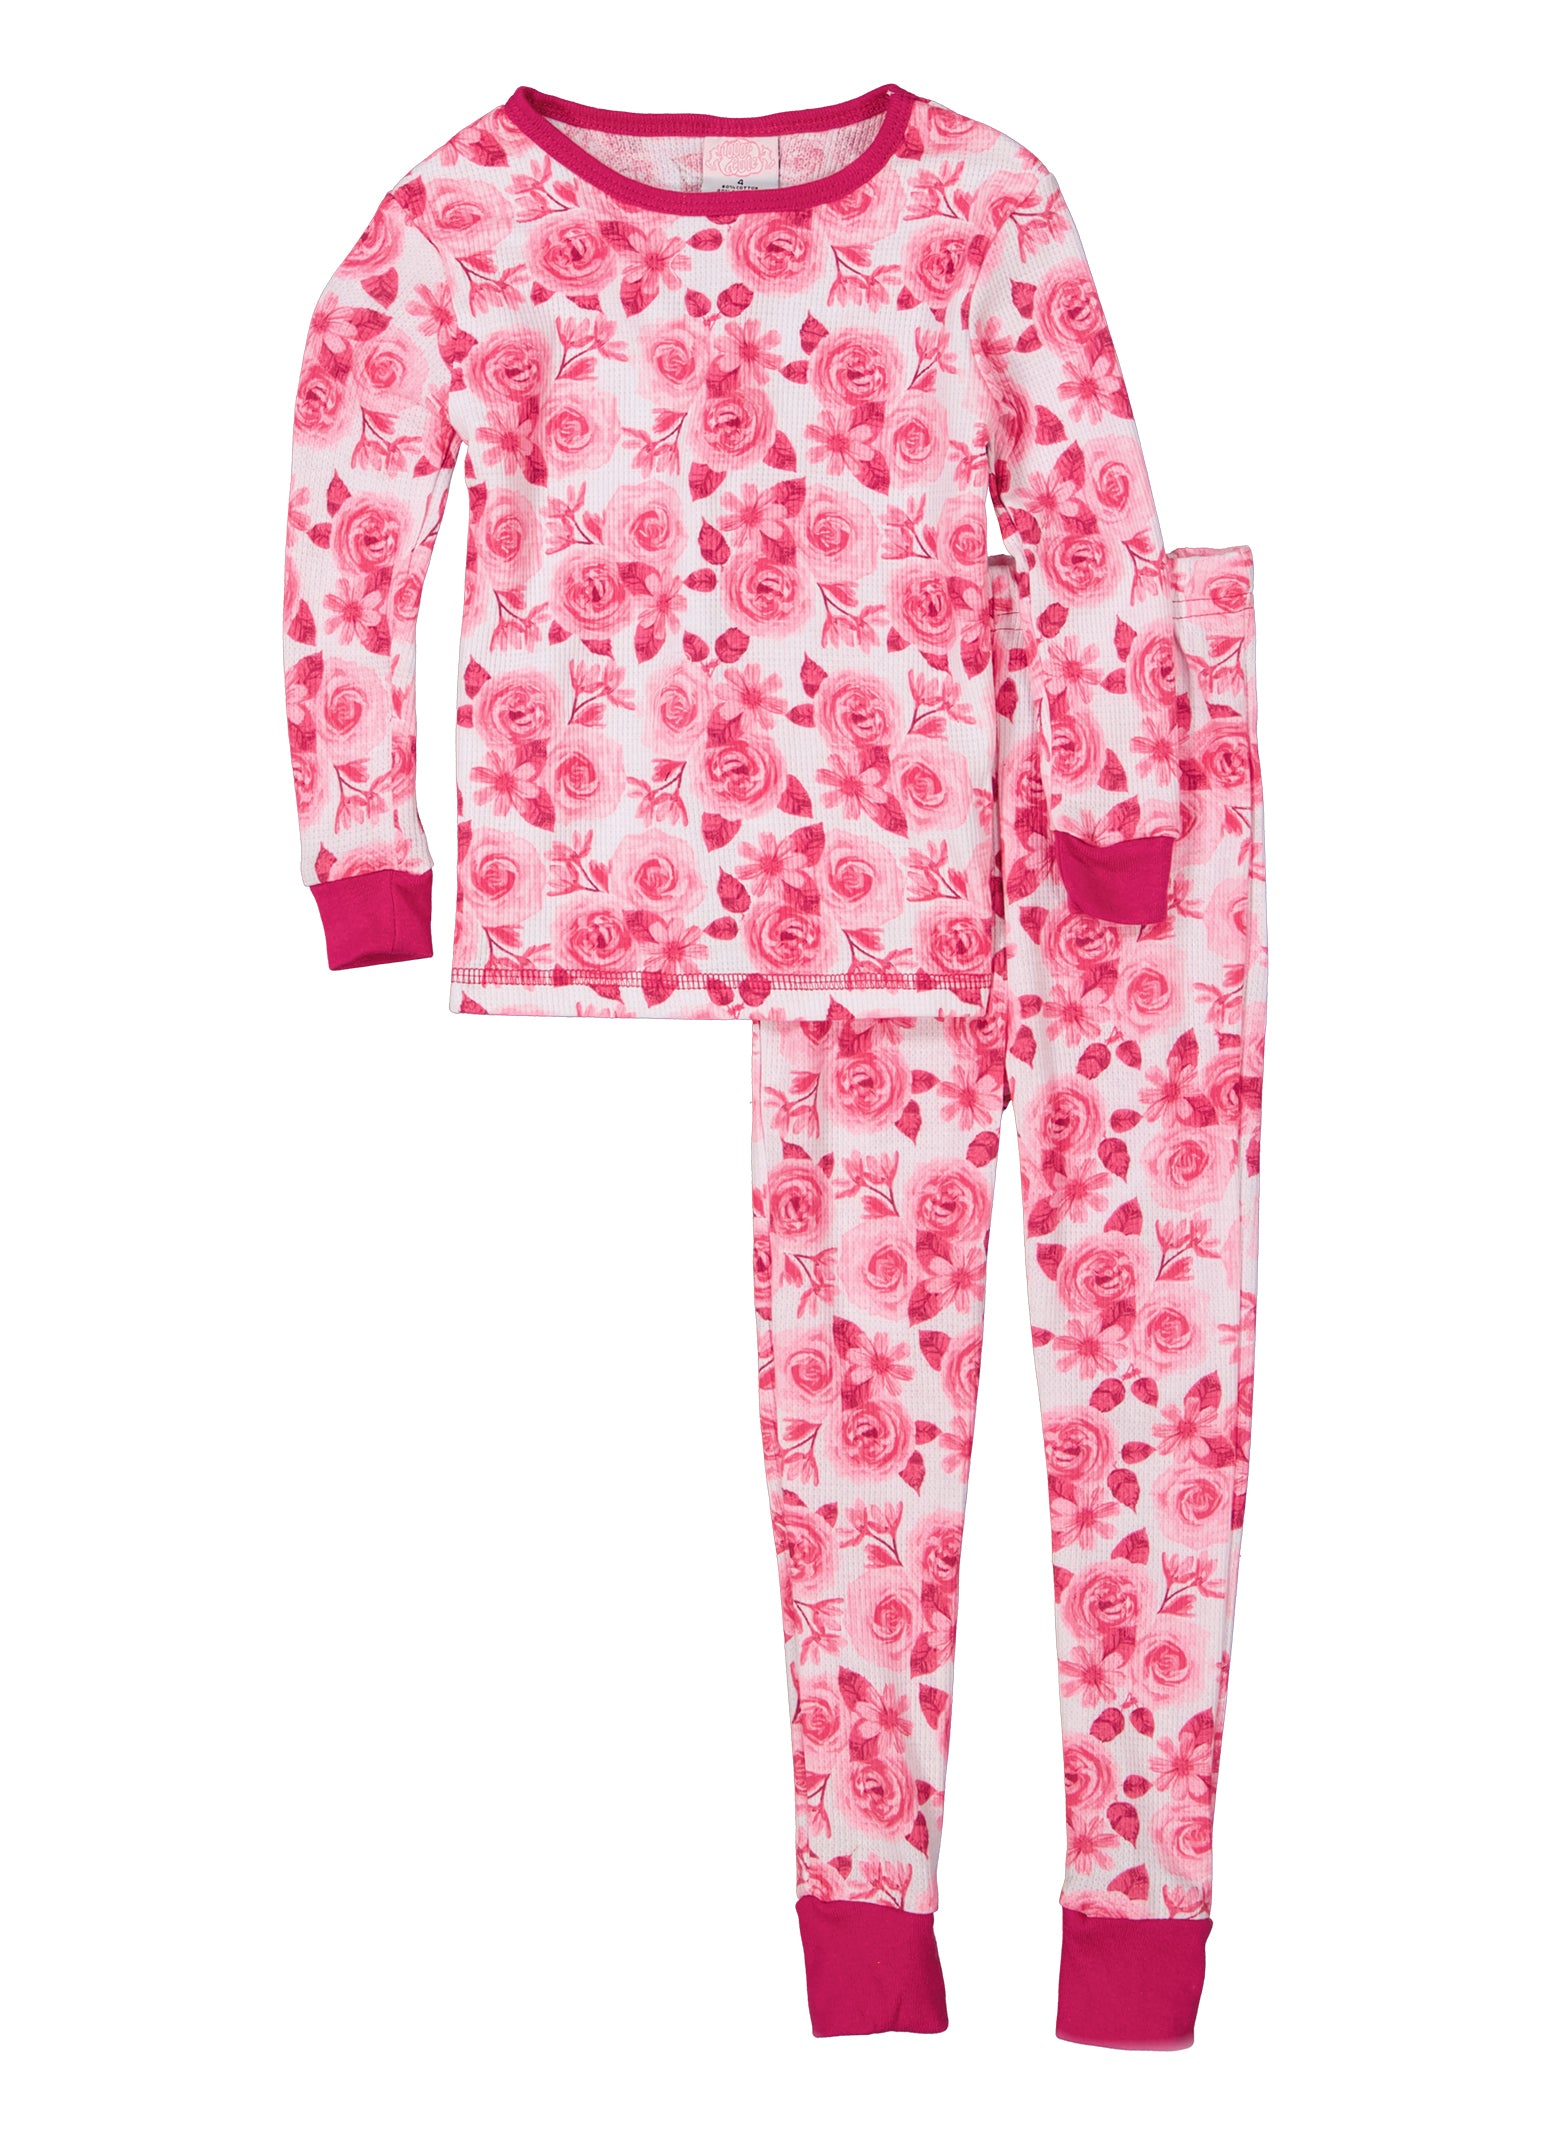 Little Girls Printed Waffle Knit Pajama Top and Pants